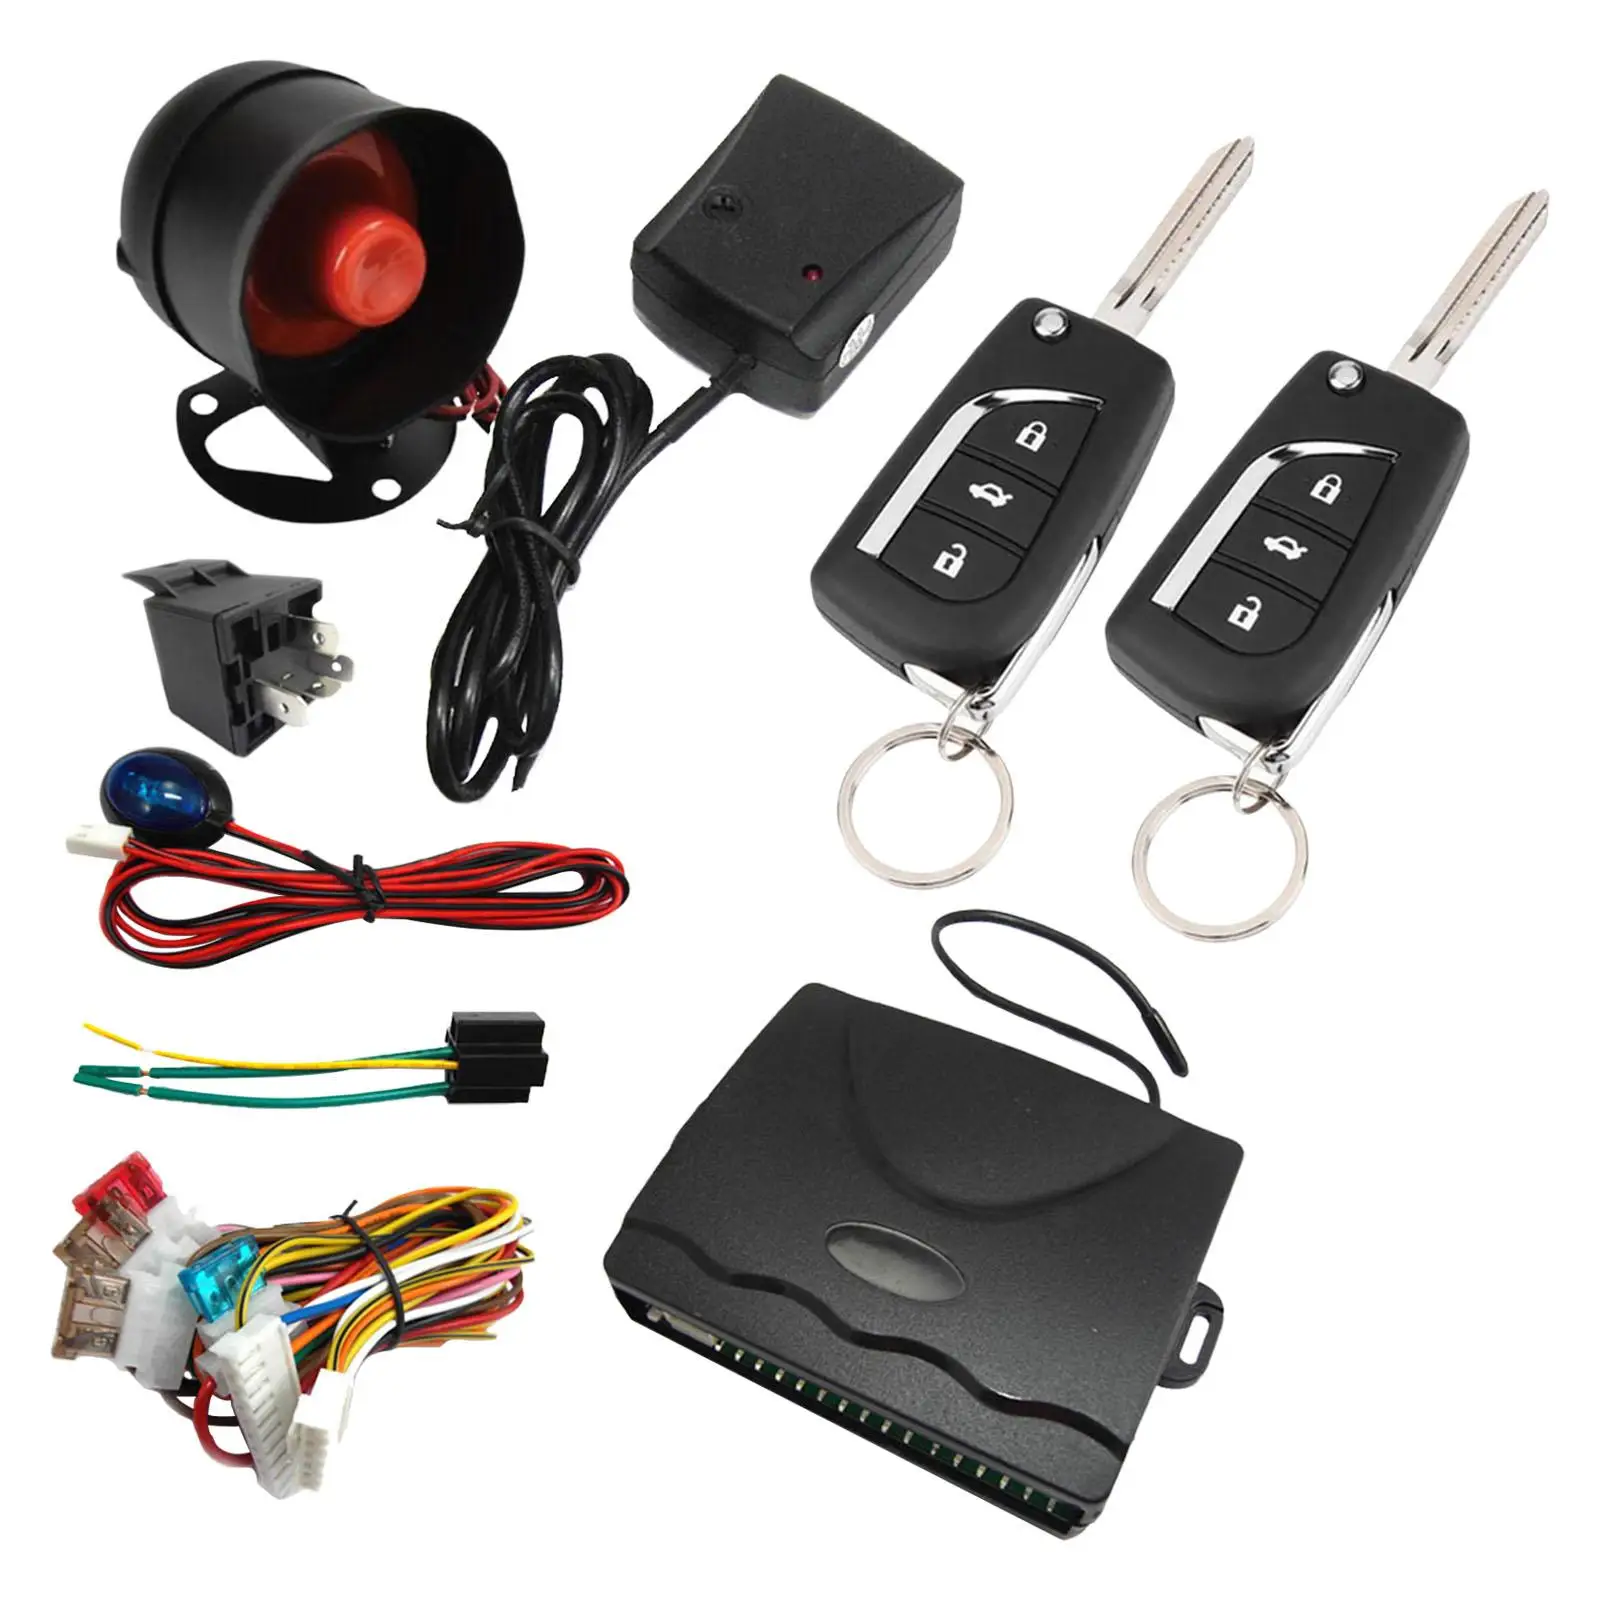 Universal 1 Way Remote Start and Keyless Entry System with 2 Remote Contorl